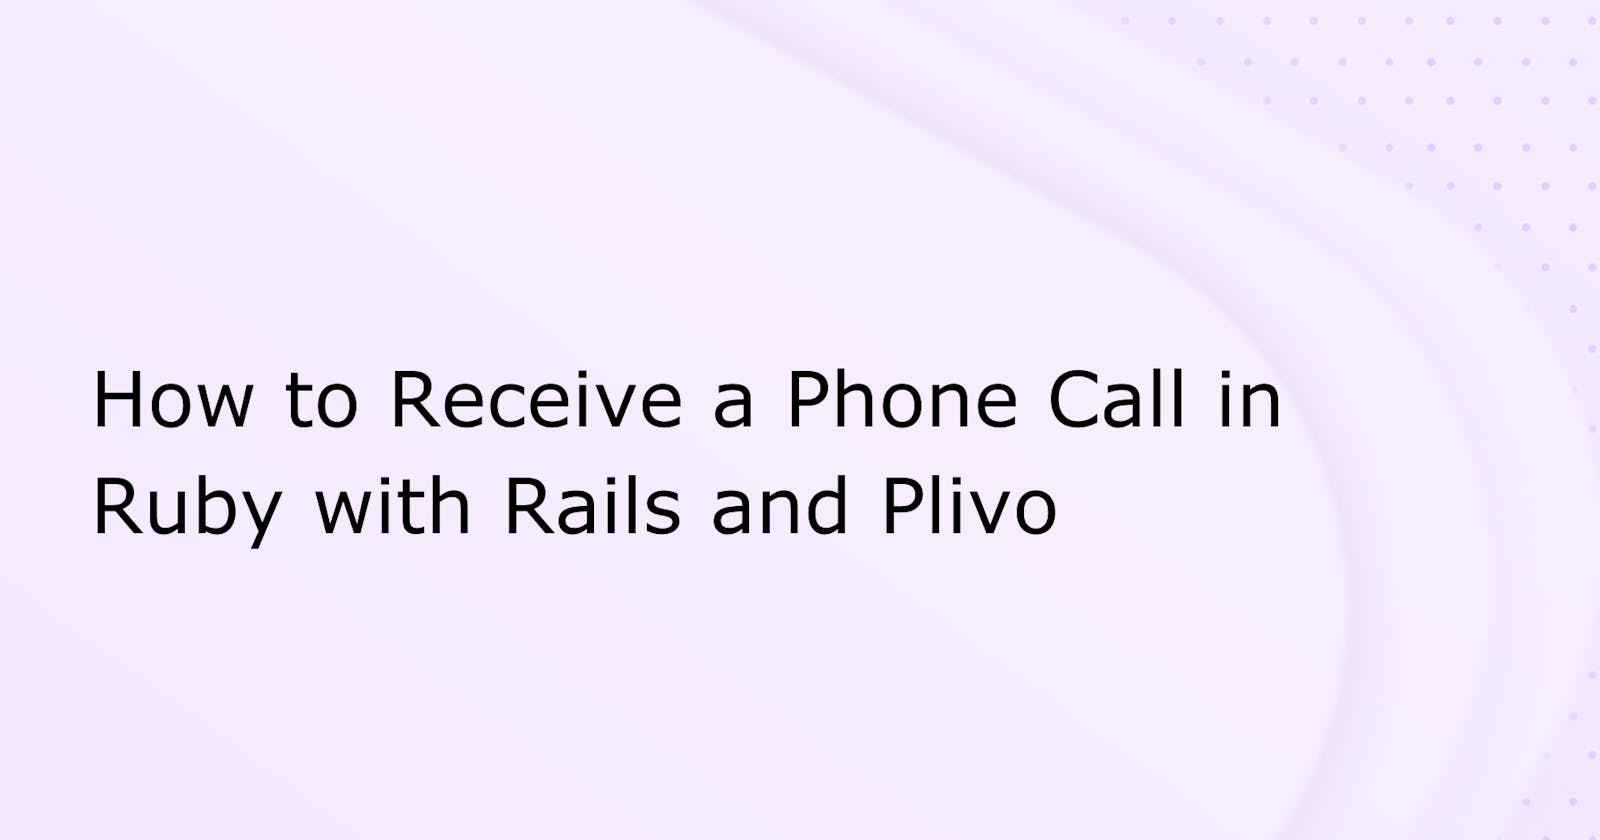 How to Receive a Phone Call in Ruby with Rails and Plivo